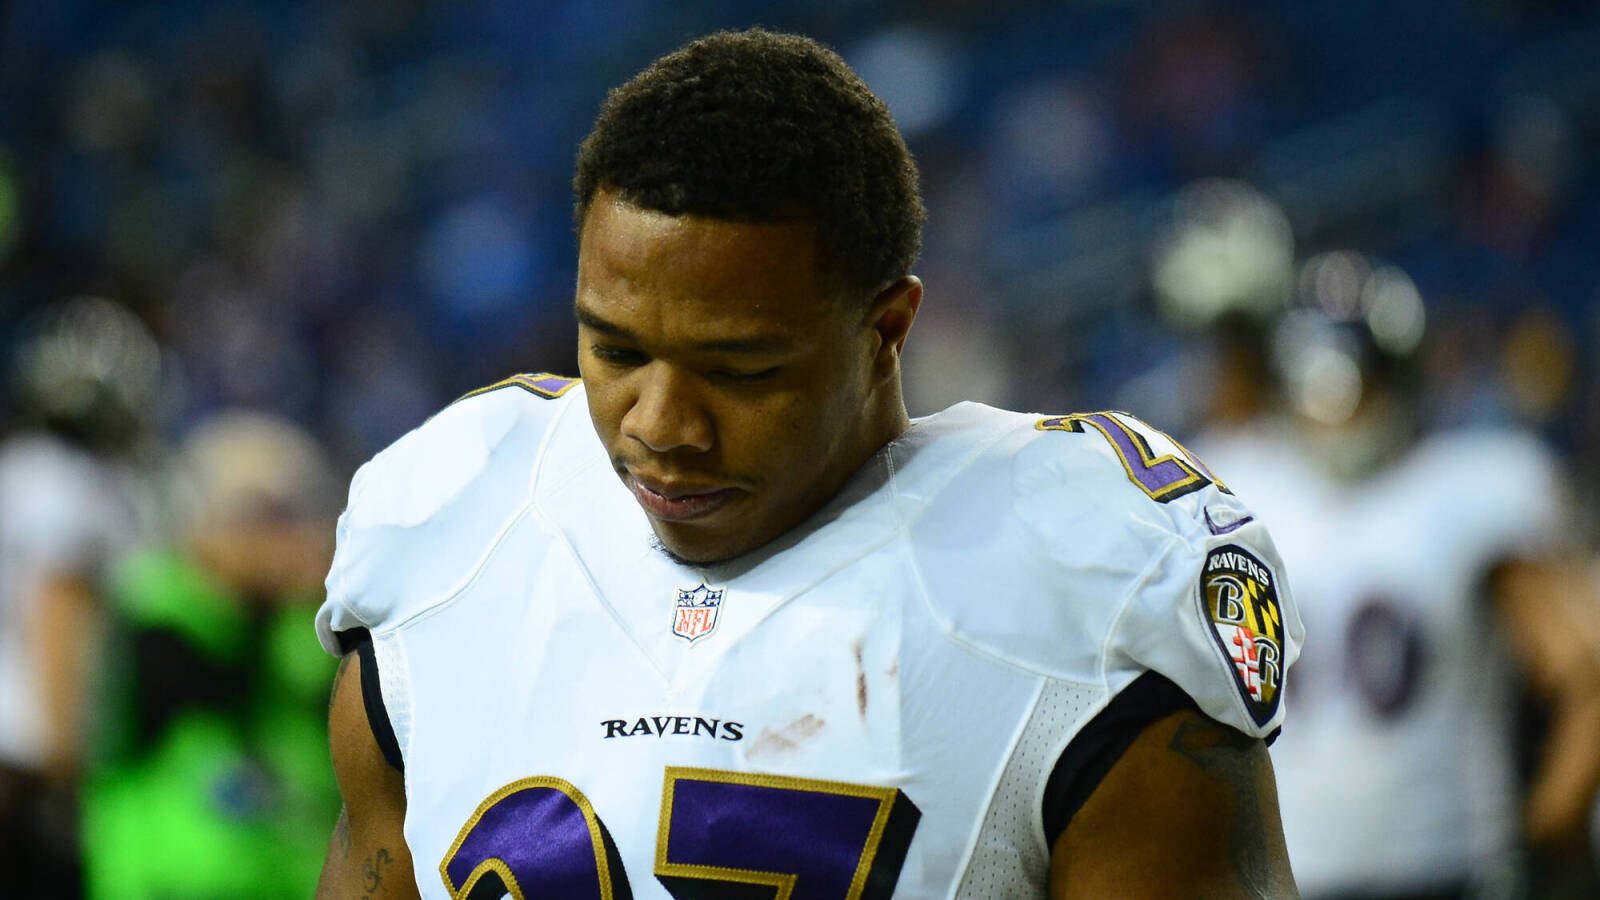 Ravens face criticism for decision to honor controversial former player